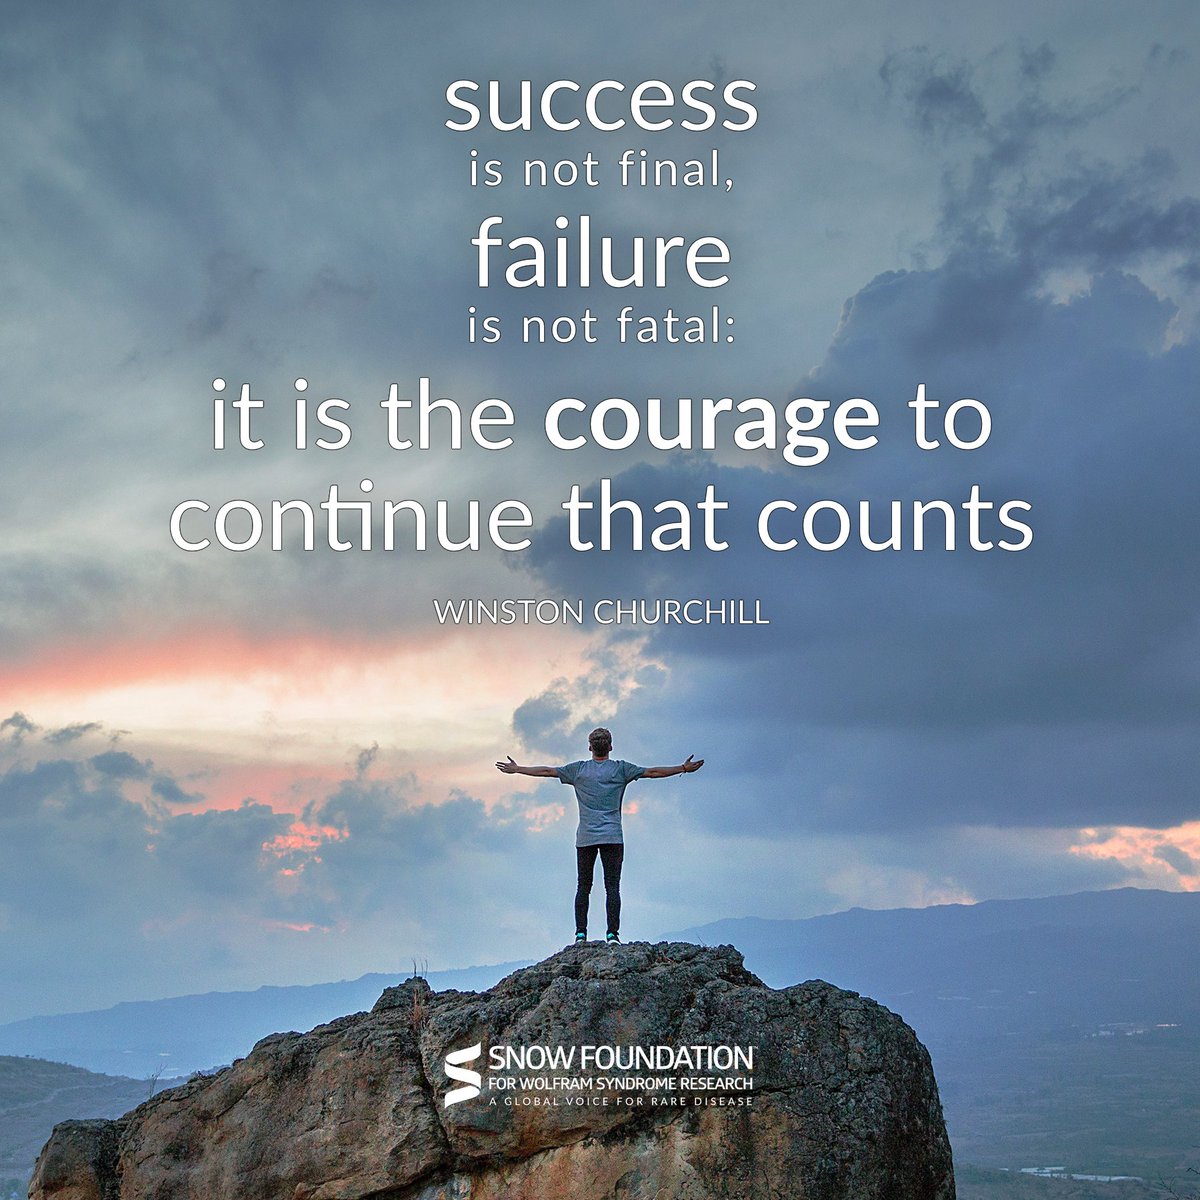 Success is not final, failure is not fatal; it is the courage to continue that counts. - Winston Churchill #wolframsyndrome #supportthecause #researchforacure #inspirationalquotes #winstonchurchillquotes